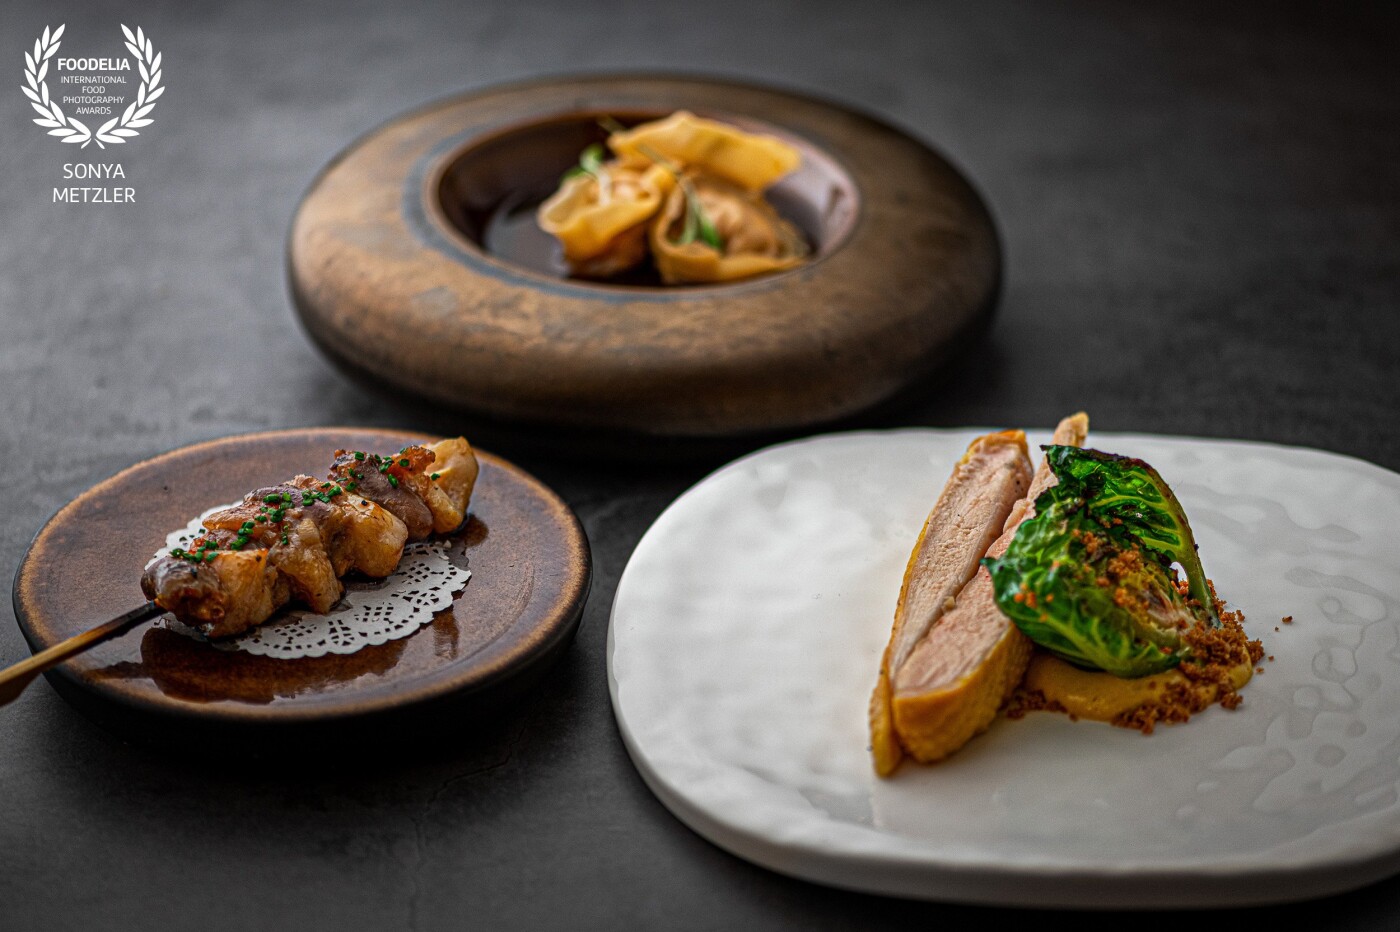 All good things come in threes - chicken three ways.<br />
Restaurant @solasoho in London, United Kingdom<br />
Chef Victor Garvey and SOLASoho team